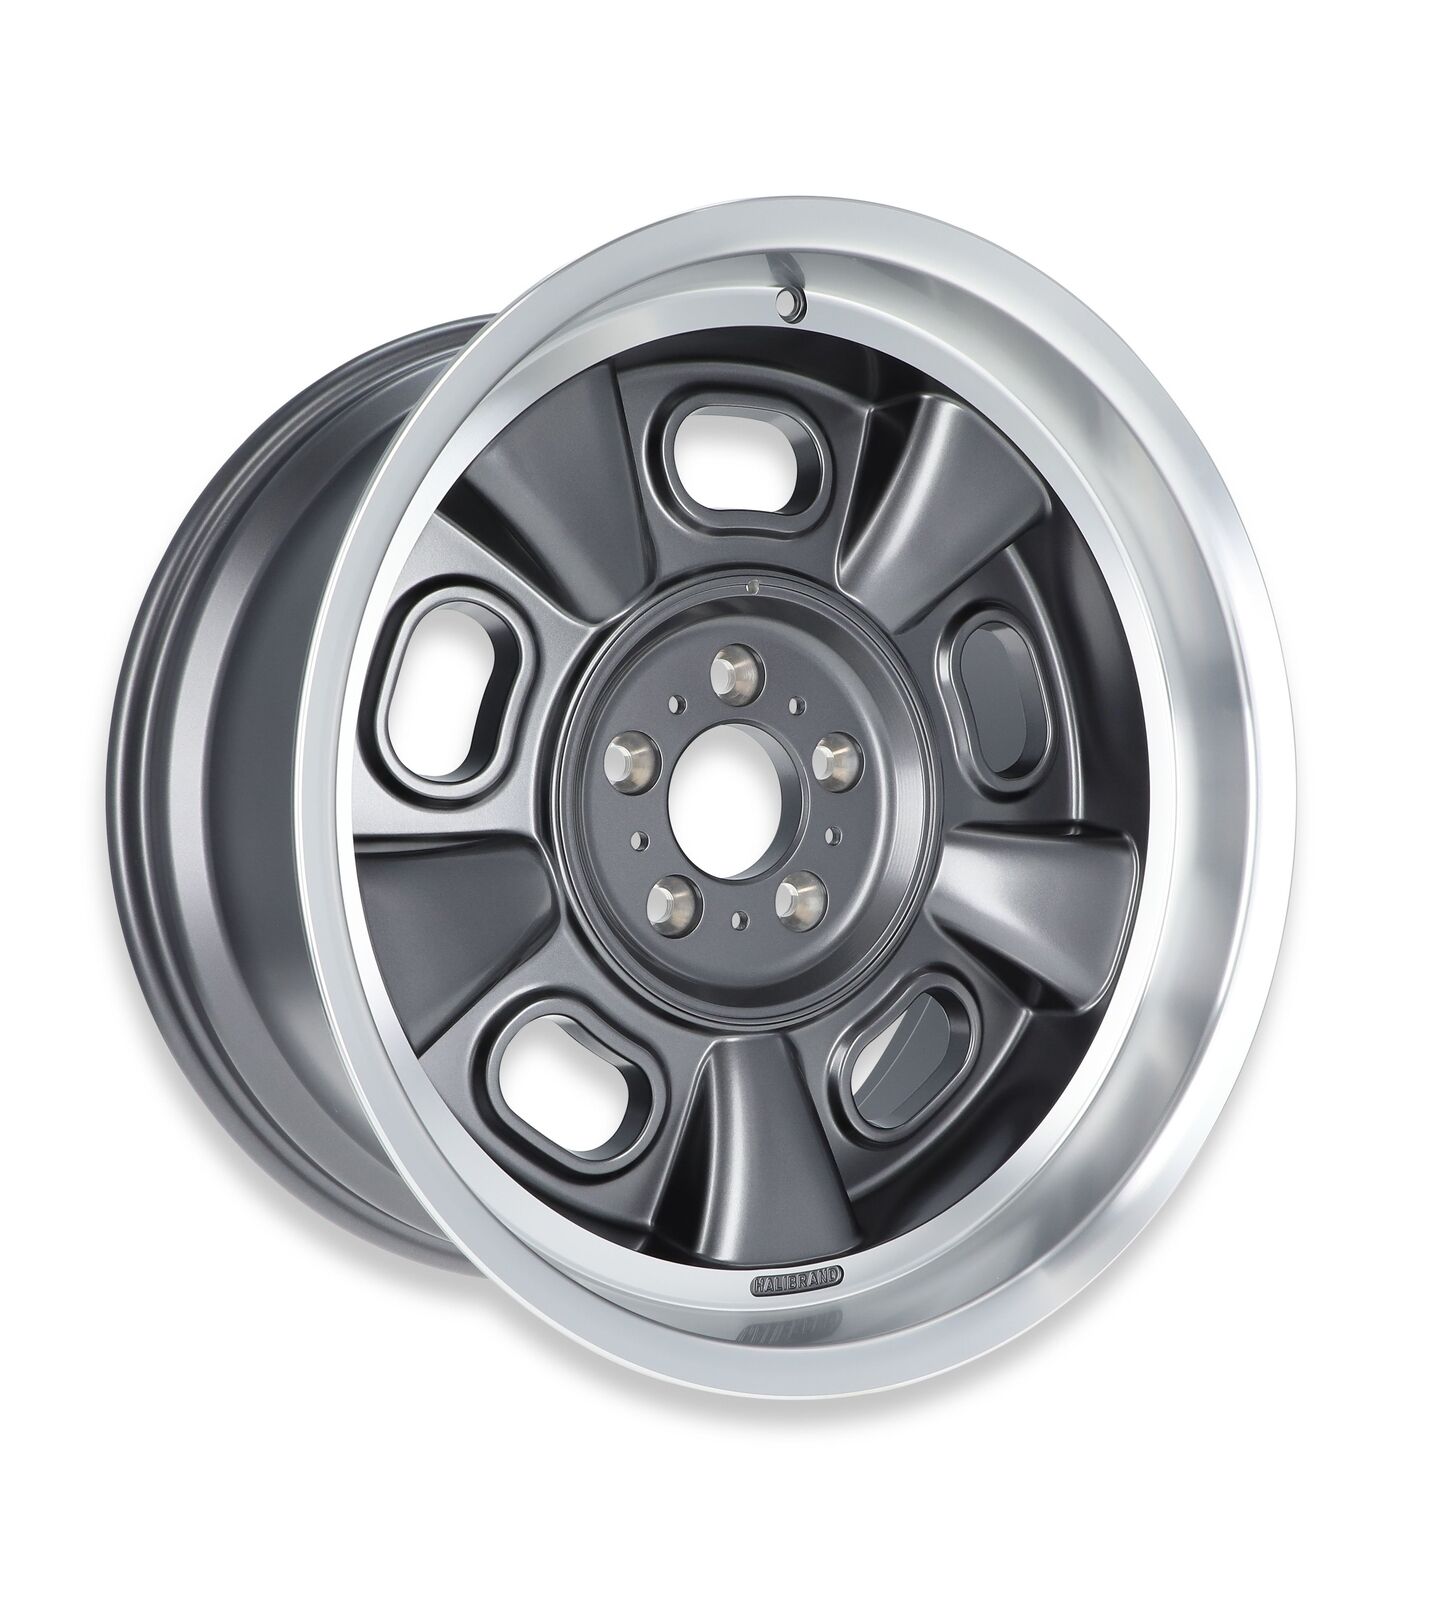 HB002-006 Halibrand Indy Roadster - 20x10 - 5x5 - 5.5 BS Anthracite Semi Gloss